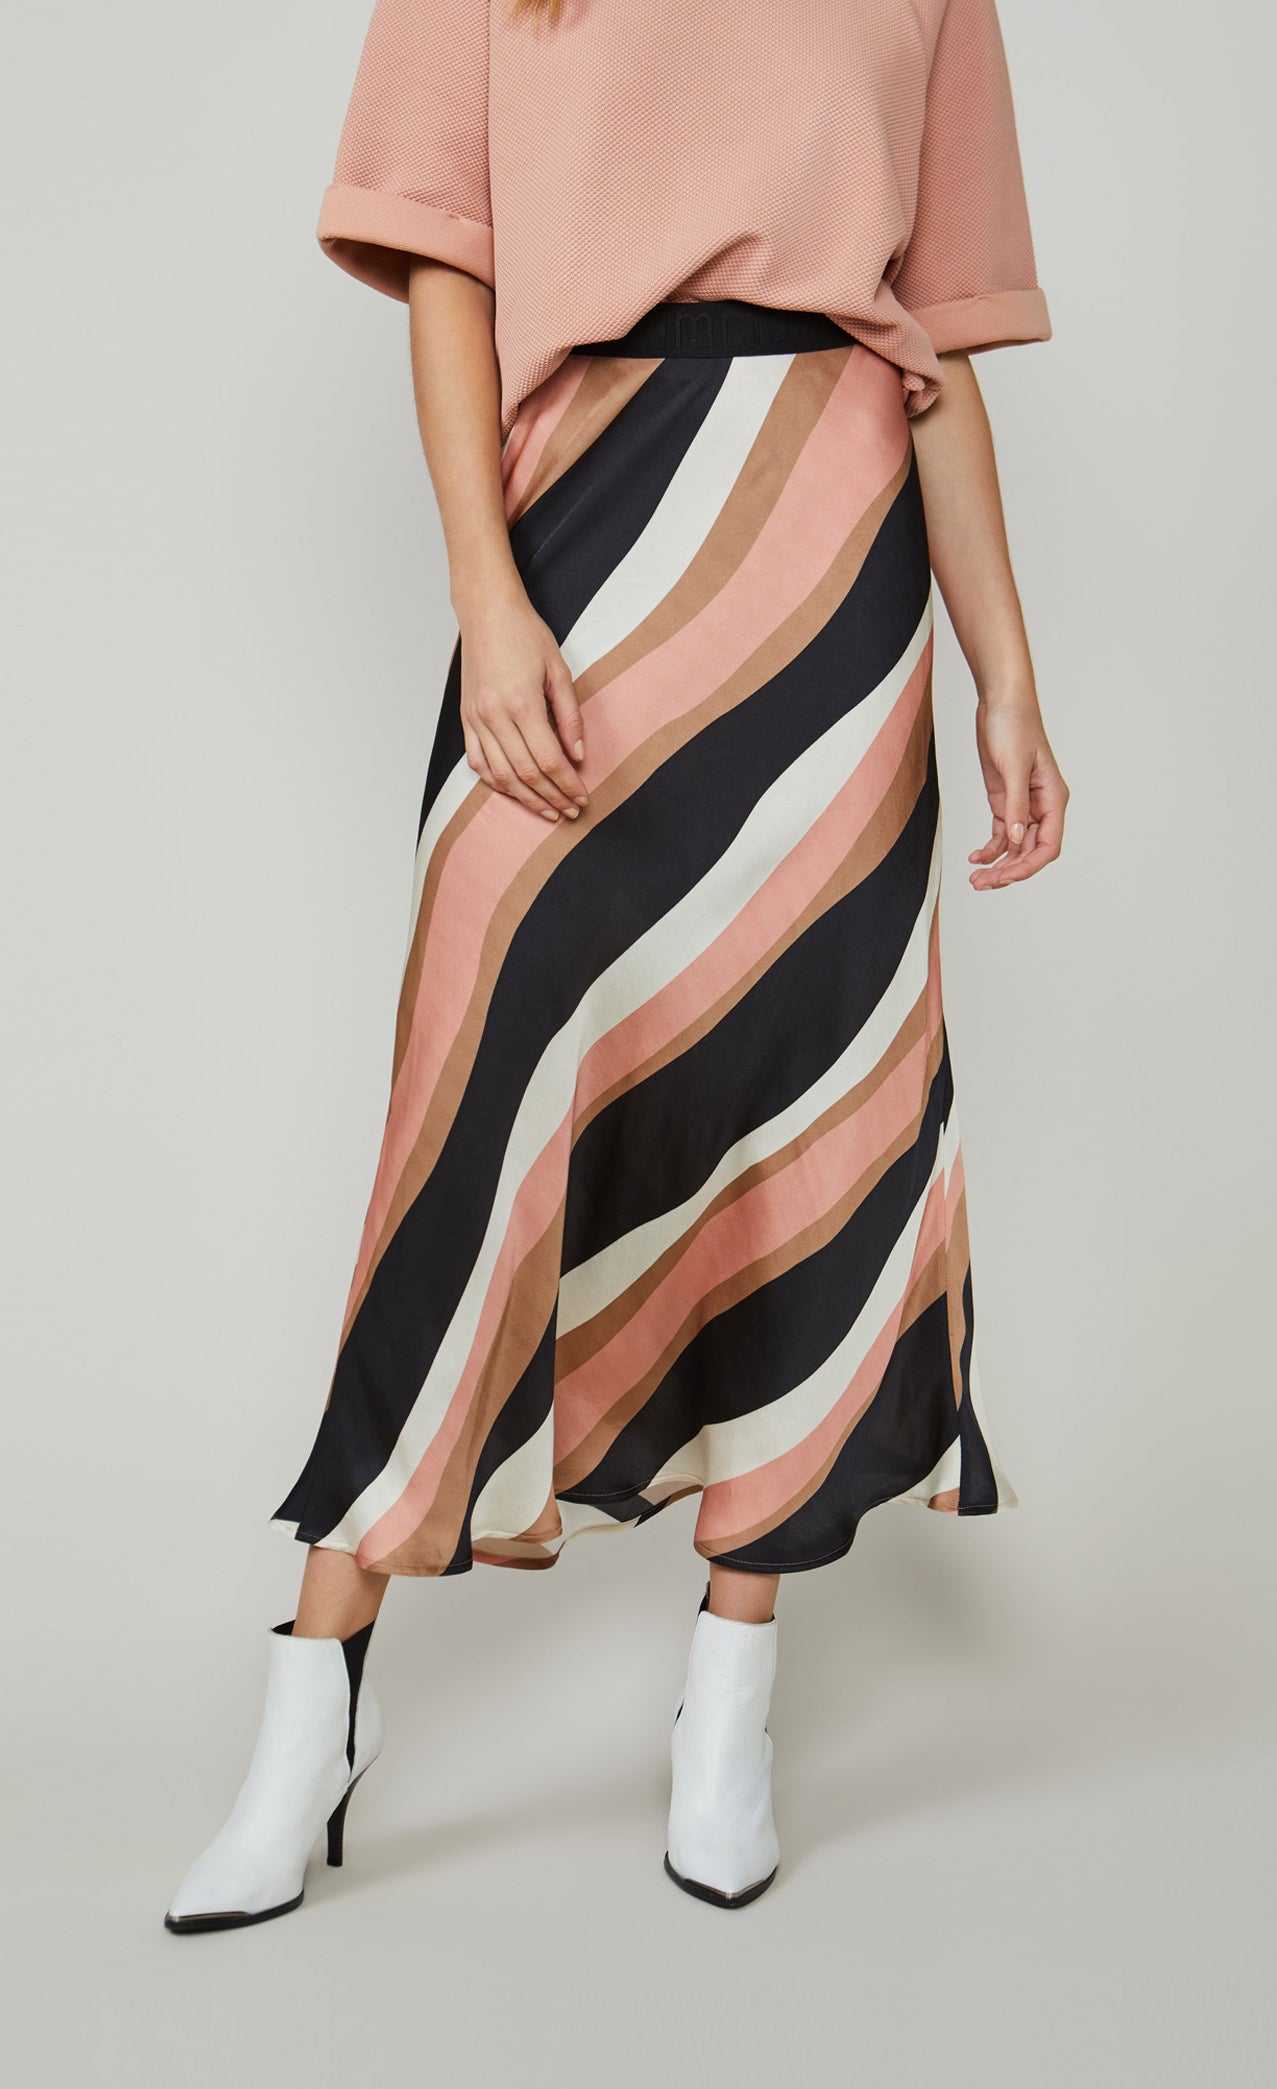 Front bottom half view of a woman wearing a pink top and the summum striped waves printed maxi skirt. This skirt has different sized wavy stripes in black pink, taupe, and white that run diagonally across it. The skirt ends just above the ankles.